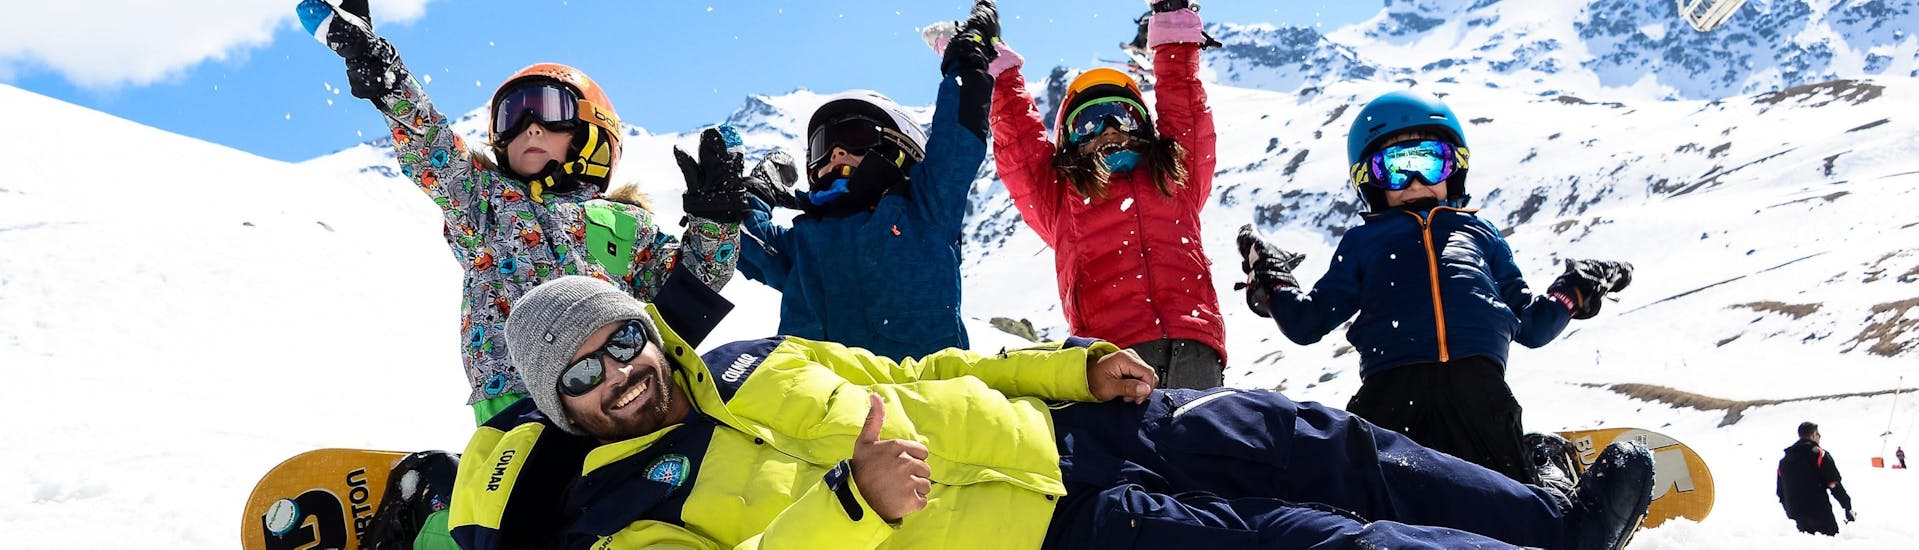 Happy children during snowboarding lessons in the ski school Prosneige Val d'Isère located in the ski resort Val d'Isère.